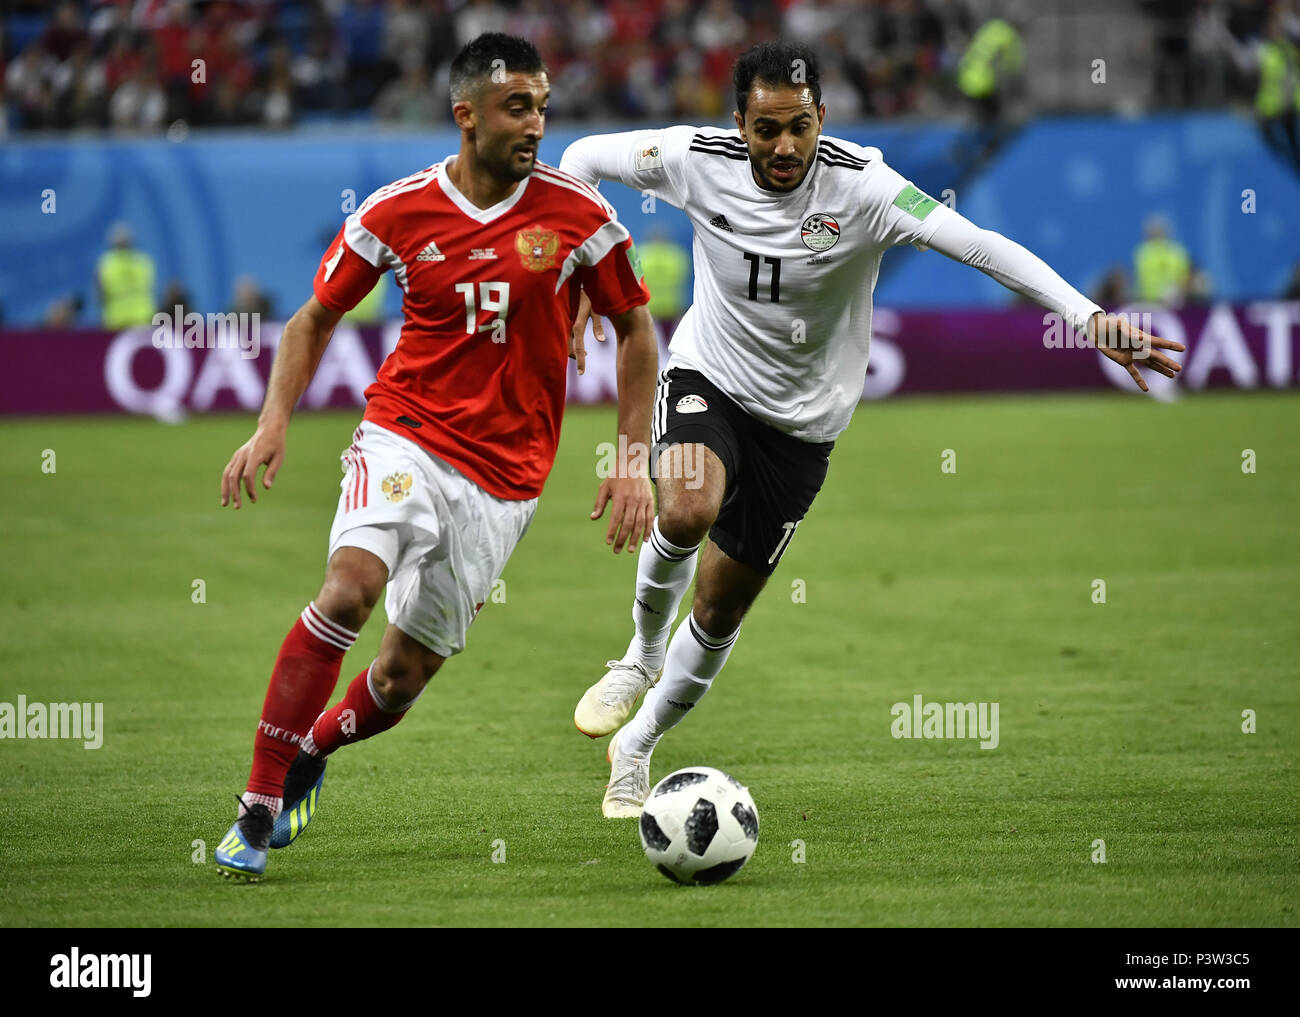 Saint Petersburg, Russia. 19th June, 2018. Alexandr Samedov (L) of Russia vies with Kahraba of Egypt during a Group A match between Russia and Egypt at the 2018 FIFA World Cup in Saint Petersburg, Russia, June 19, 2018. Russia won 3-1. Credit: Chen Yichen/Xinhua/Alamy Live News Stock Photo